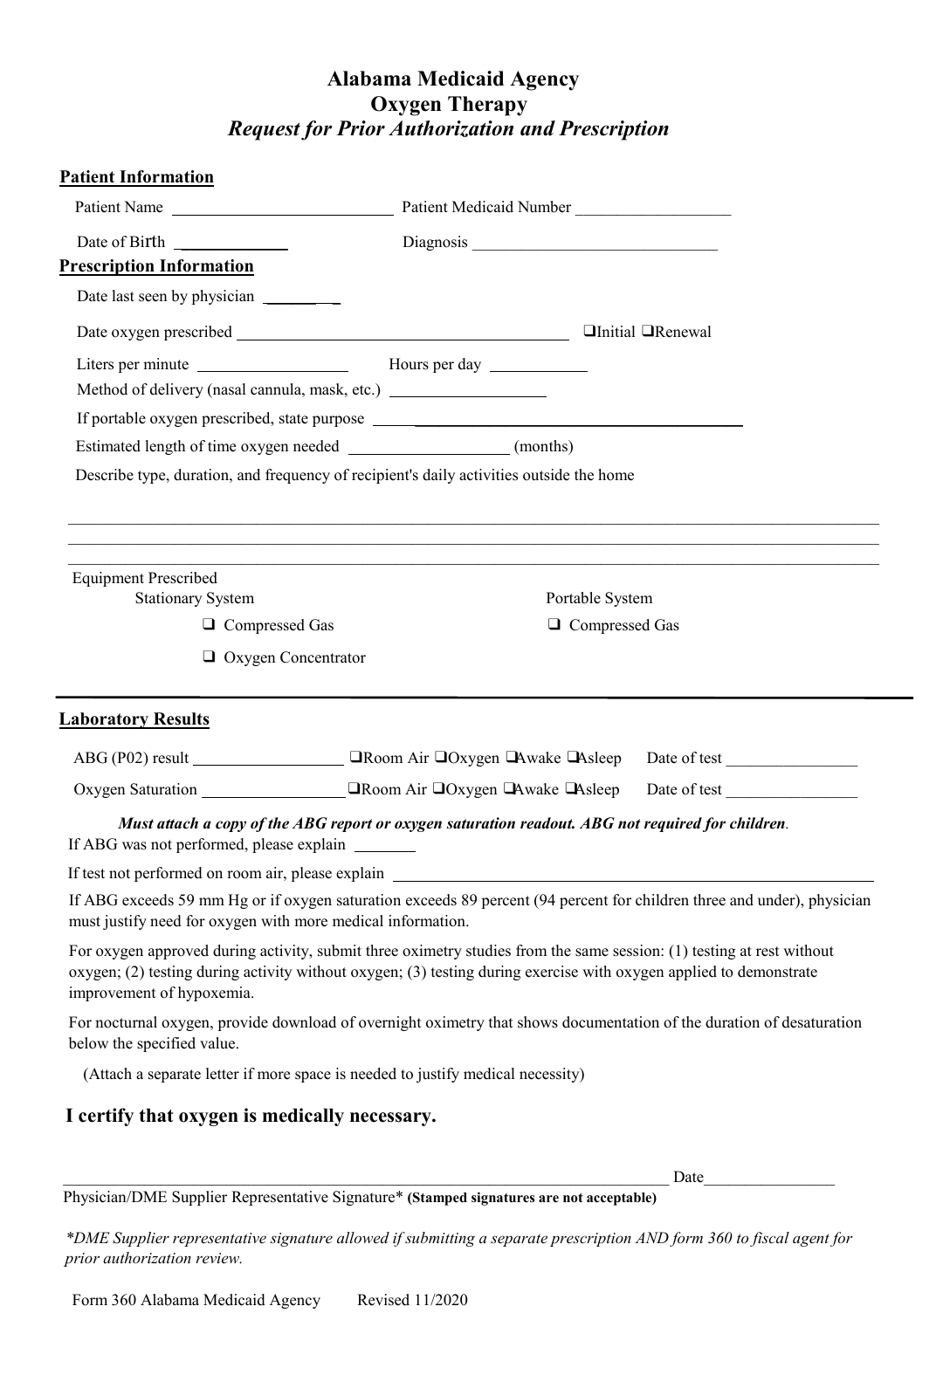 Form 360 Oxygen Therapy Request for Prior Authorization and Prescription - Alabama, Page 1